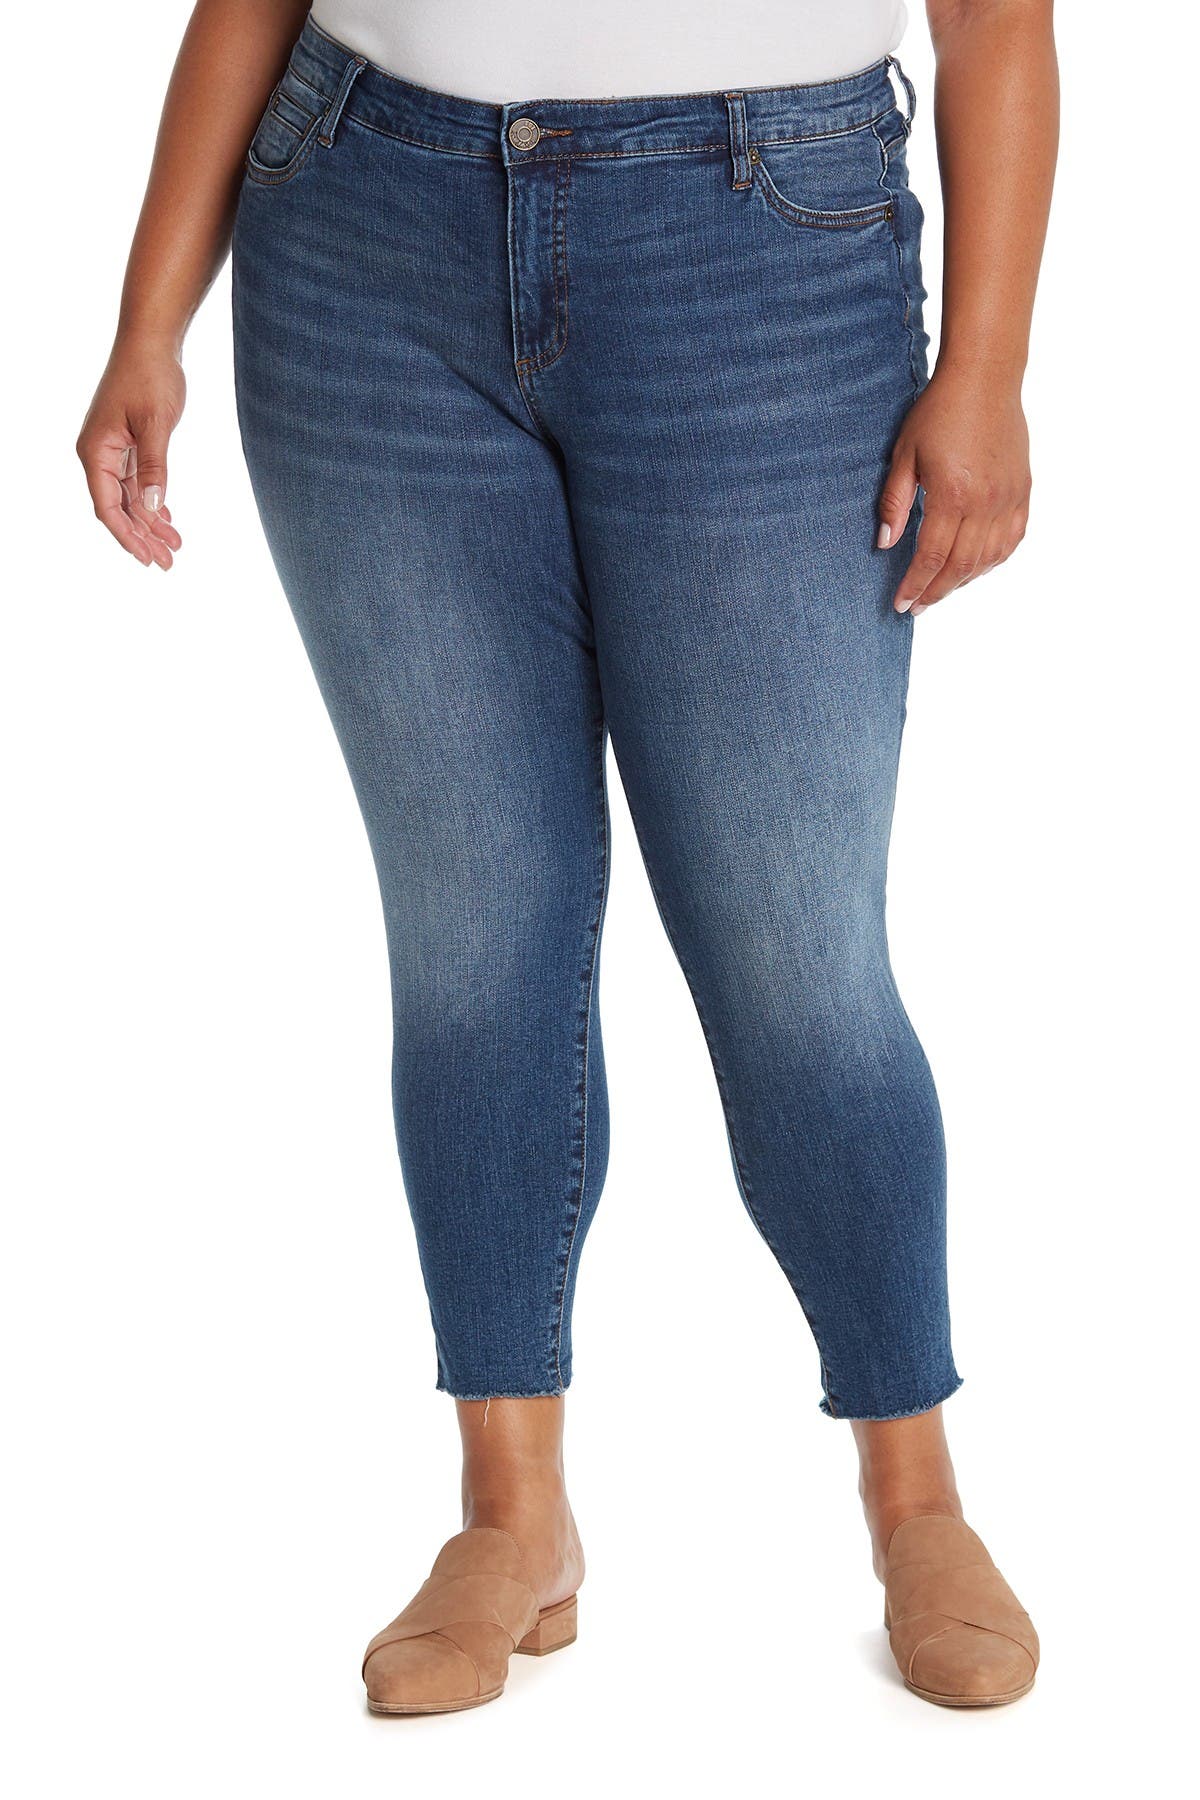 kut from the kloth plus size